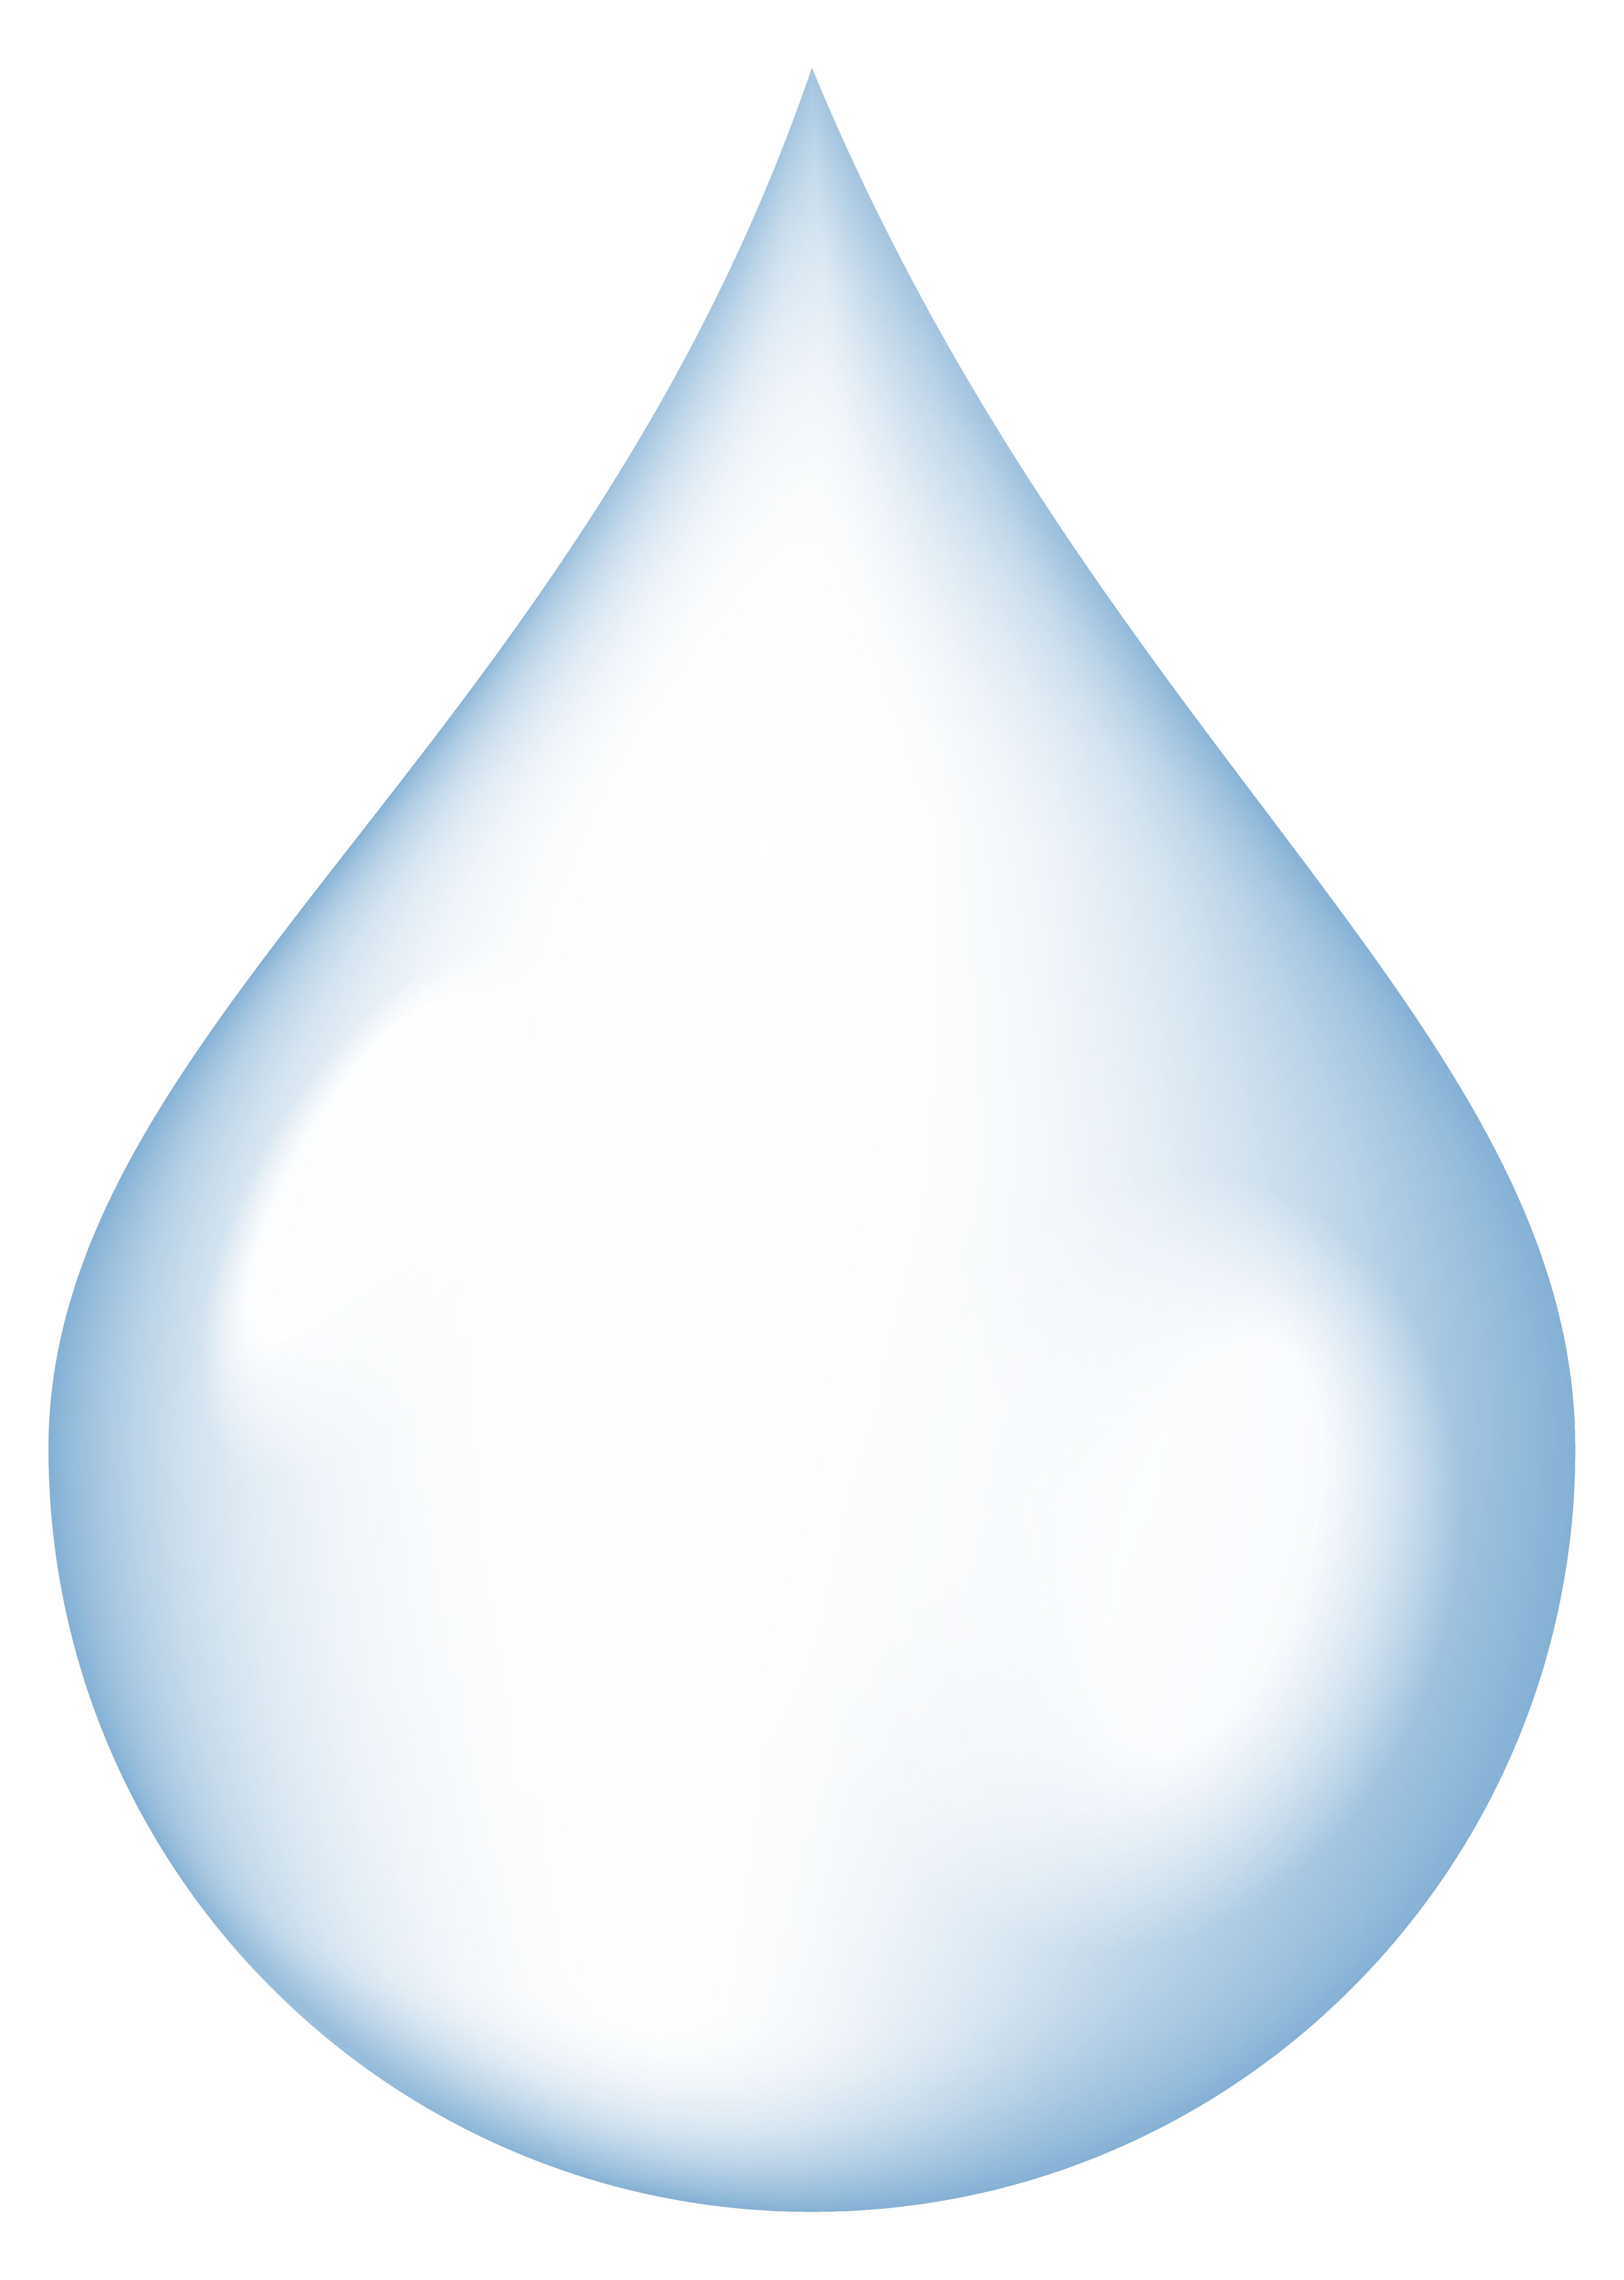 Water Drop PNG Clip Art Image | Gallery Yopriceville ...